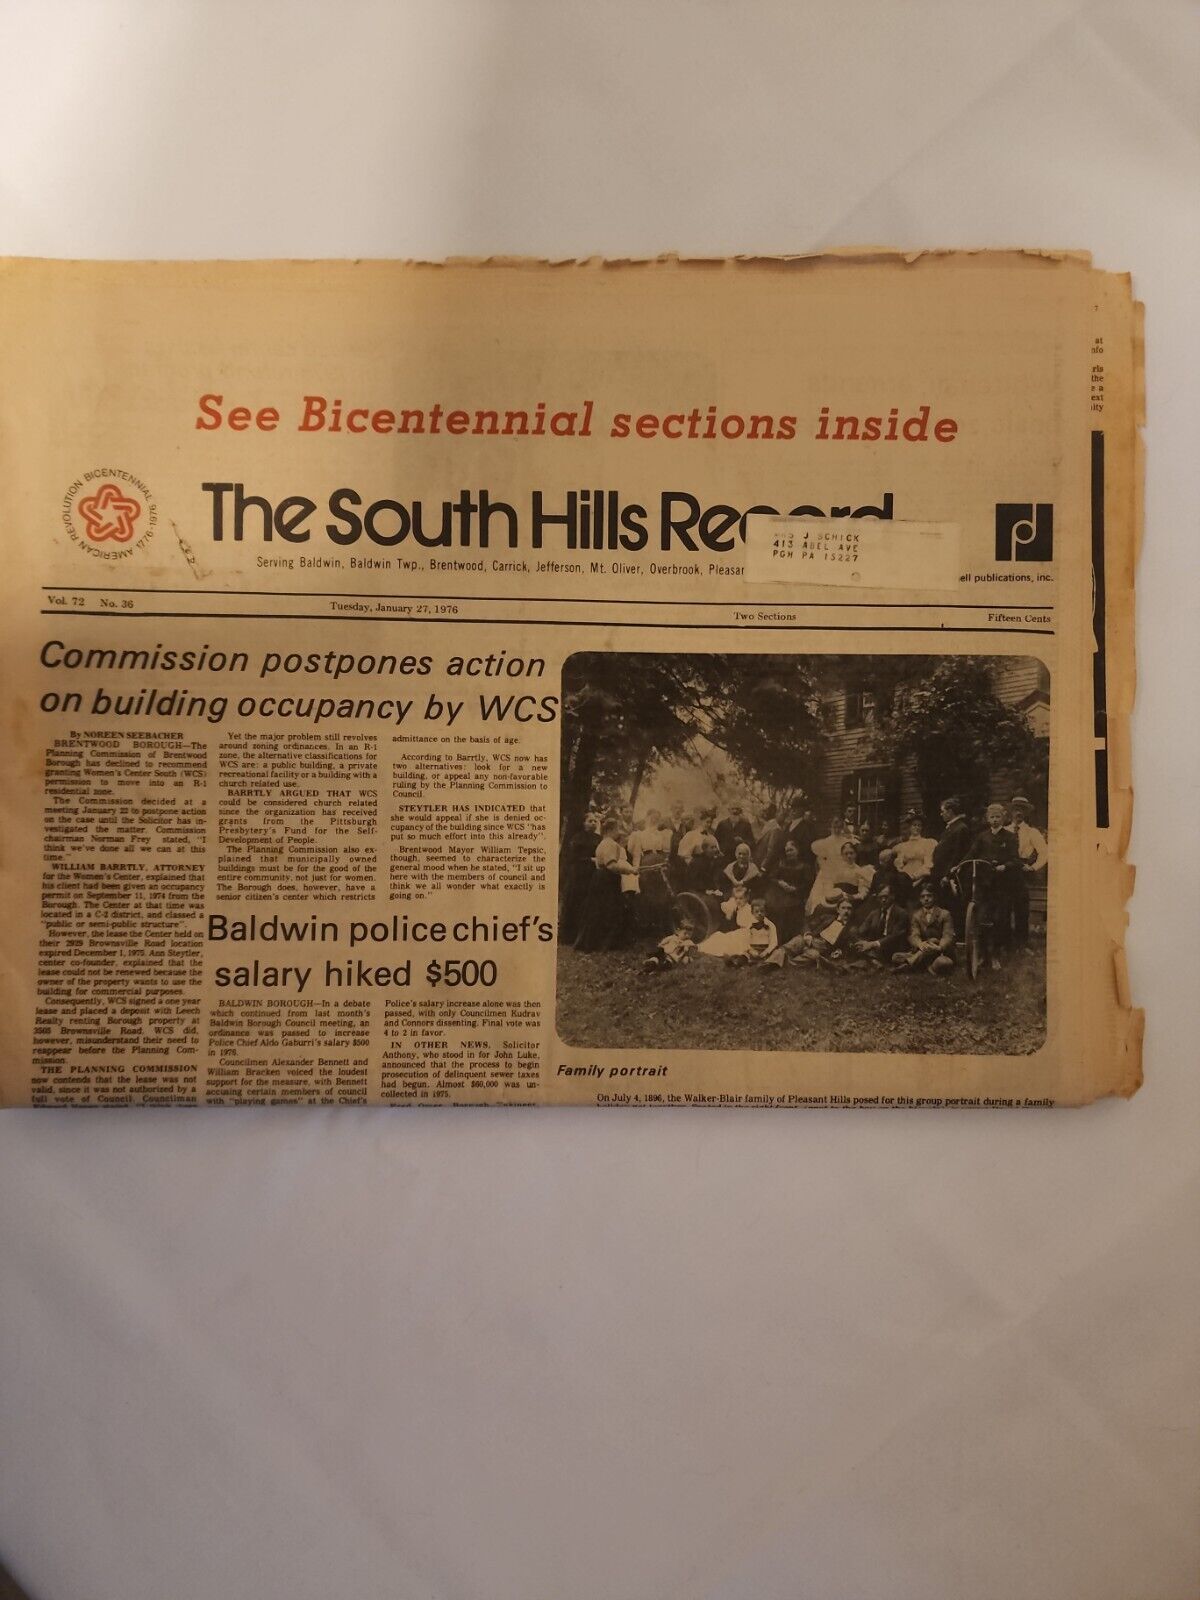 1976 January 27 The South Hills Record U.S.A Bicentennial Edtion w/ Flag (MH50)